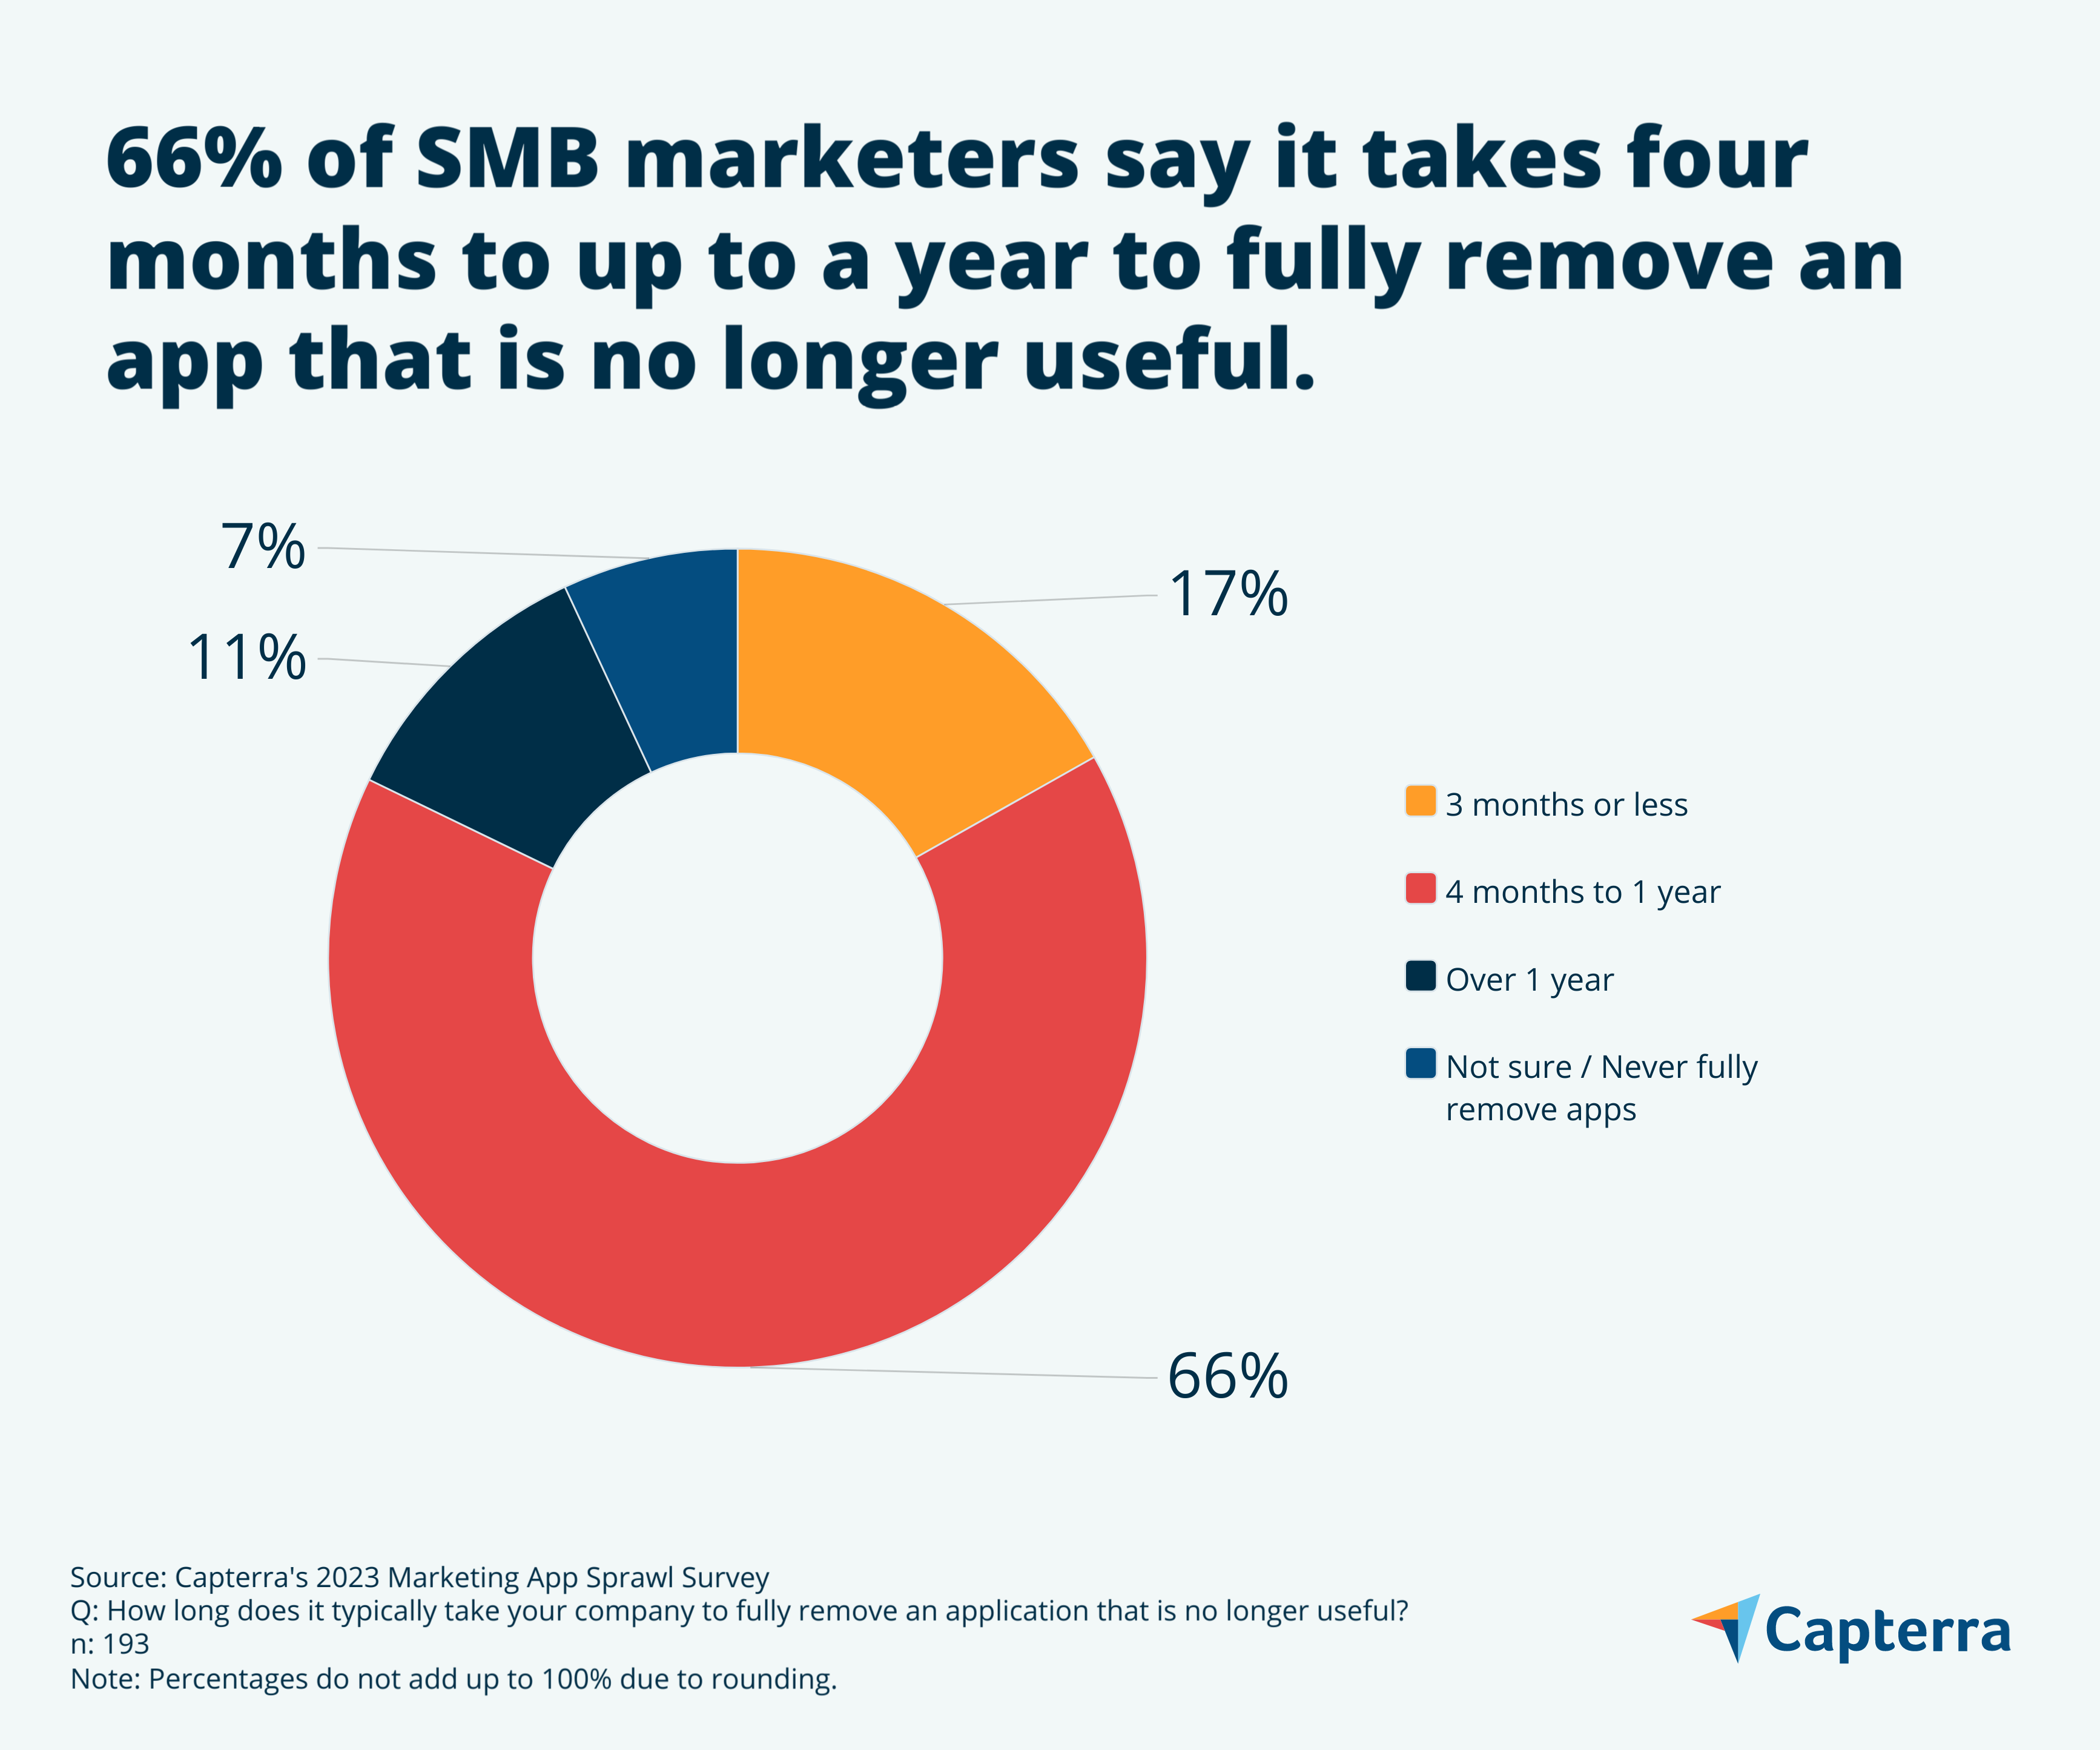 Removing apps graphic for the blog article "Marketing App Sprawl is Wasting Time and Money. Here’s How to Fix It"